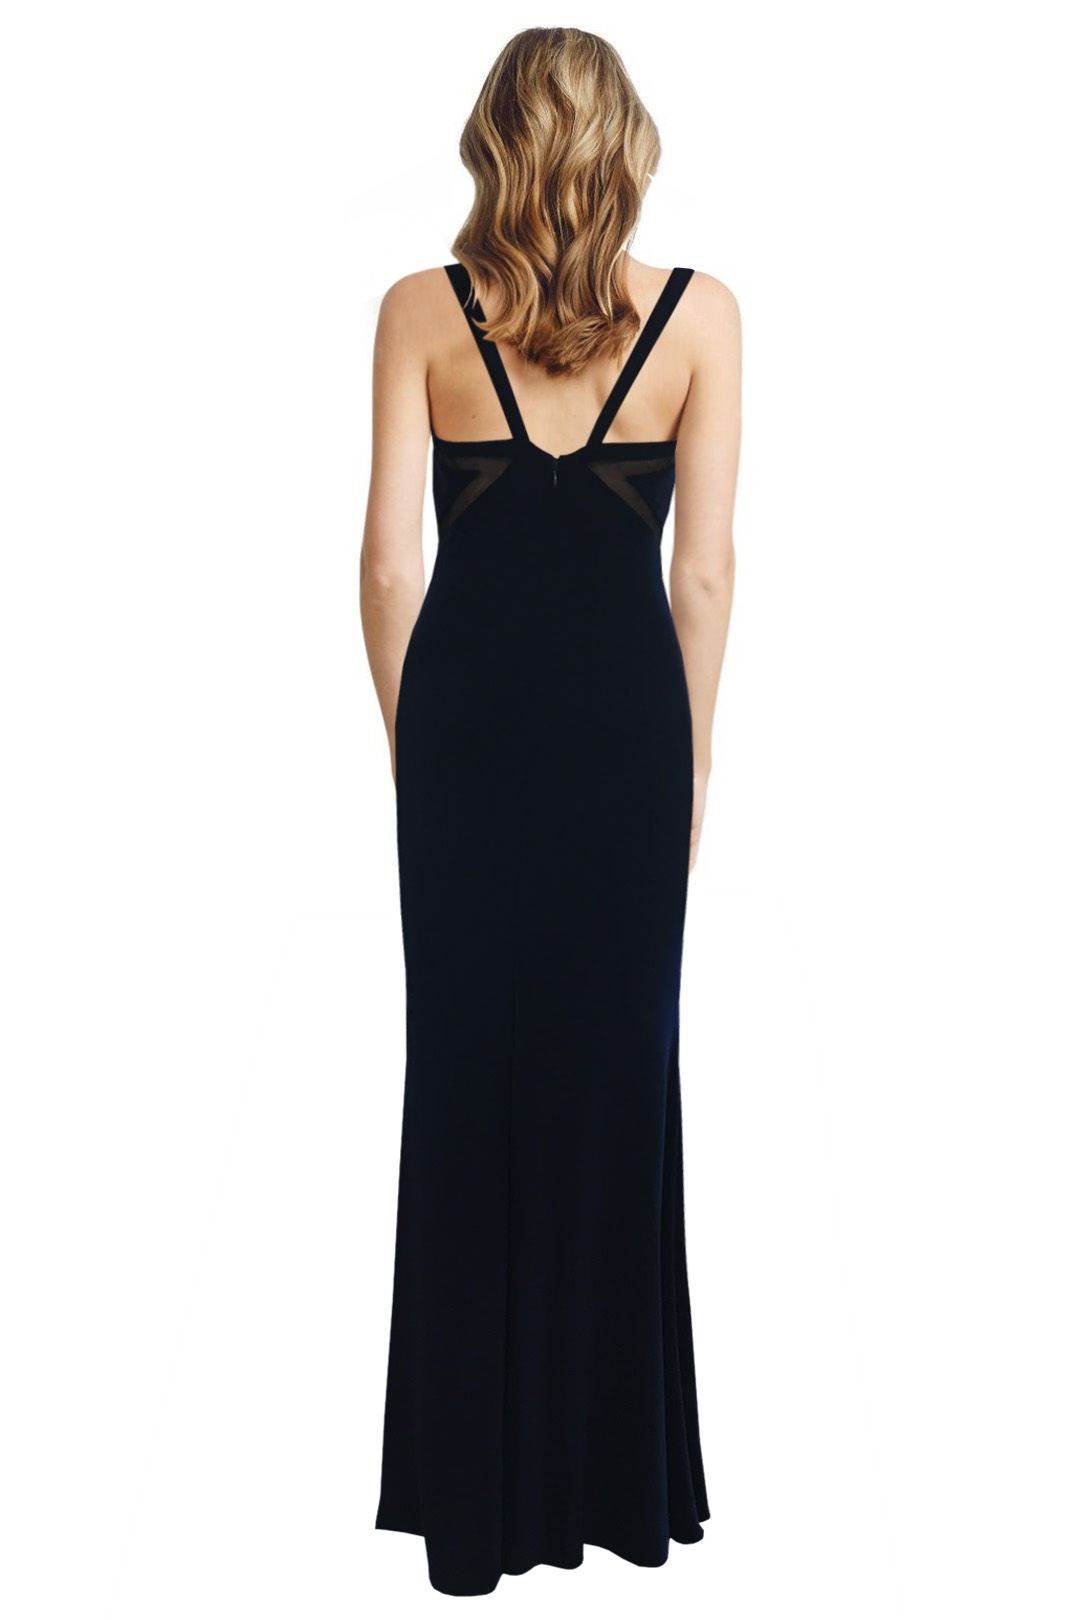 George - Athena Gown - Black - Back